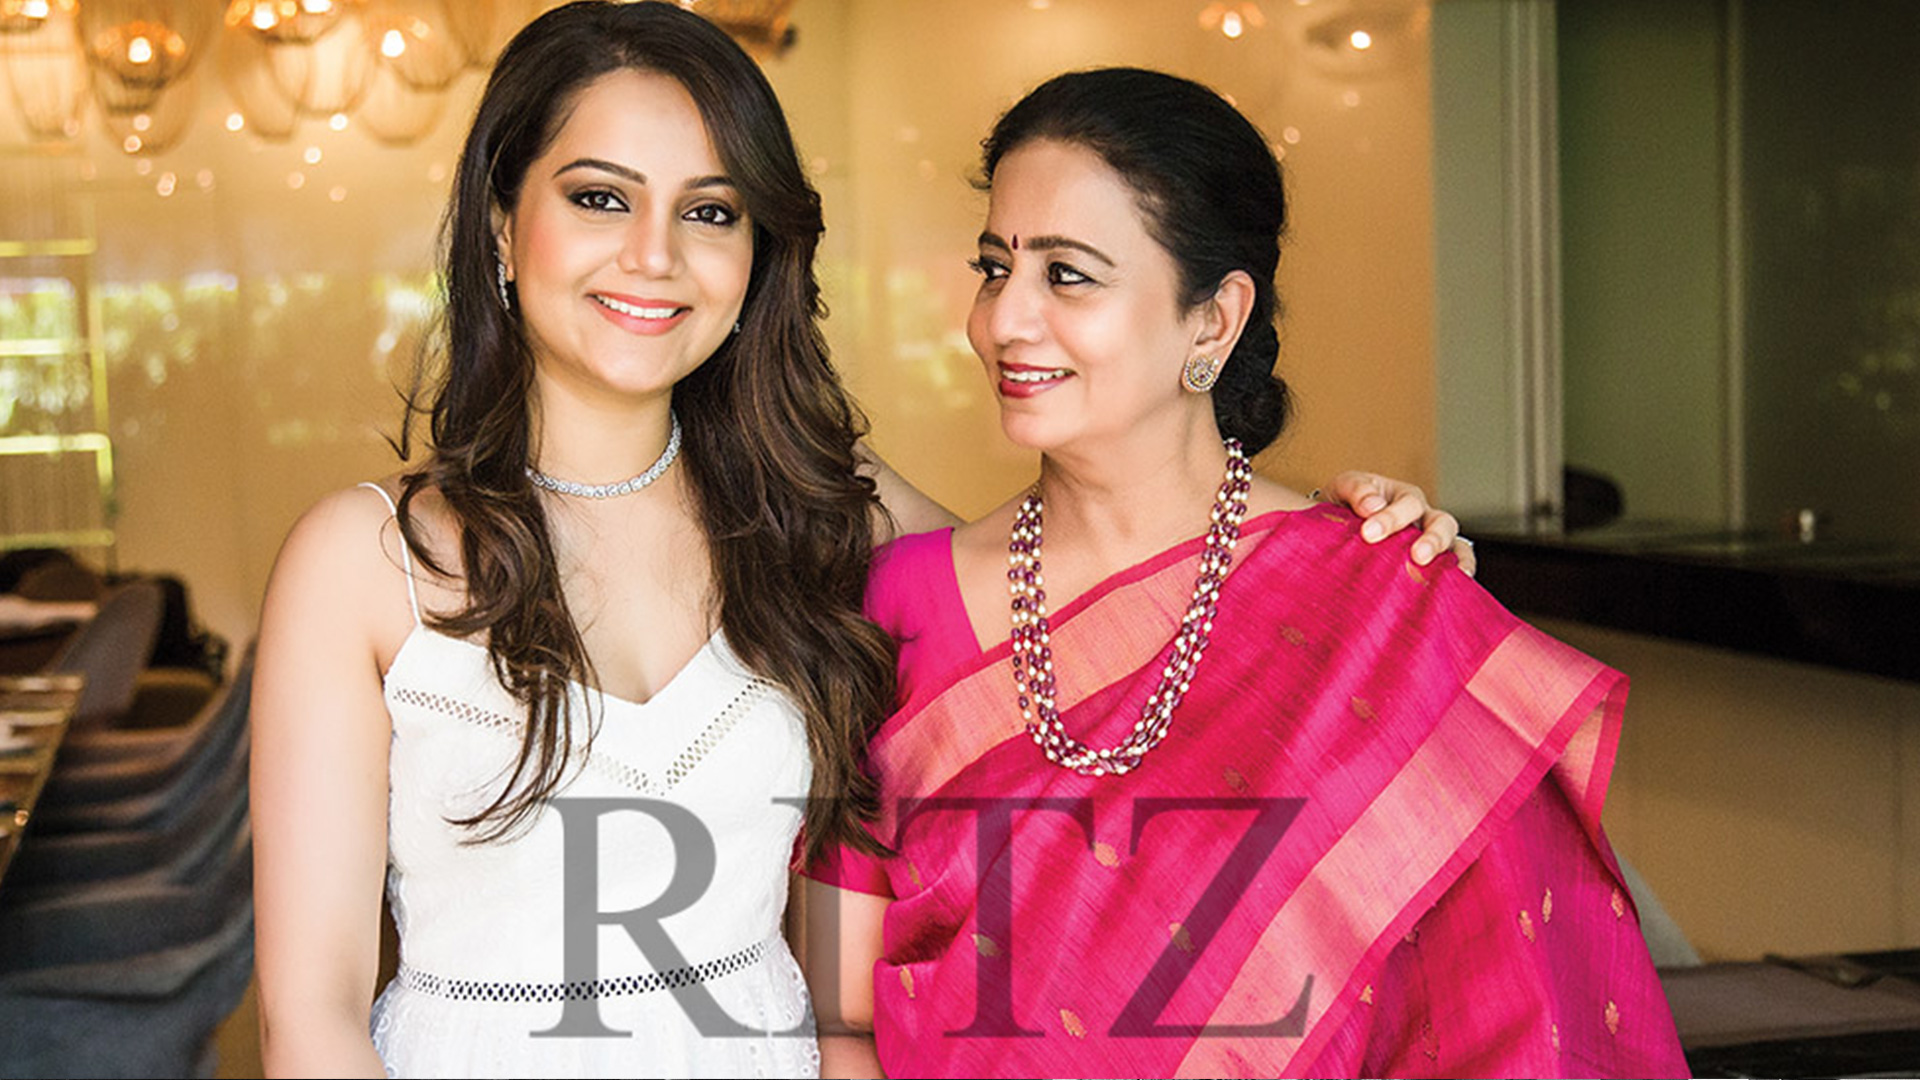 RITZ Magazine | Mother’s Day Out